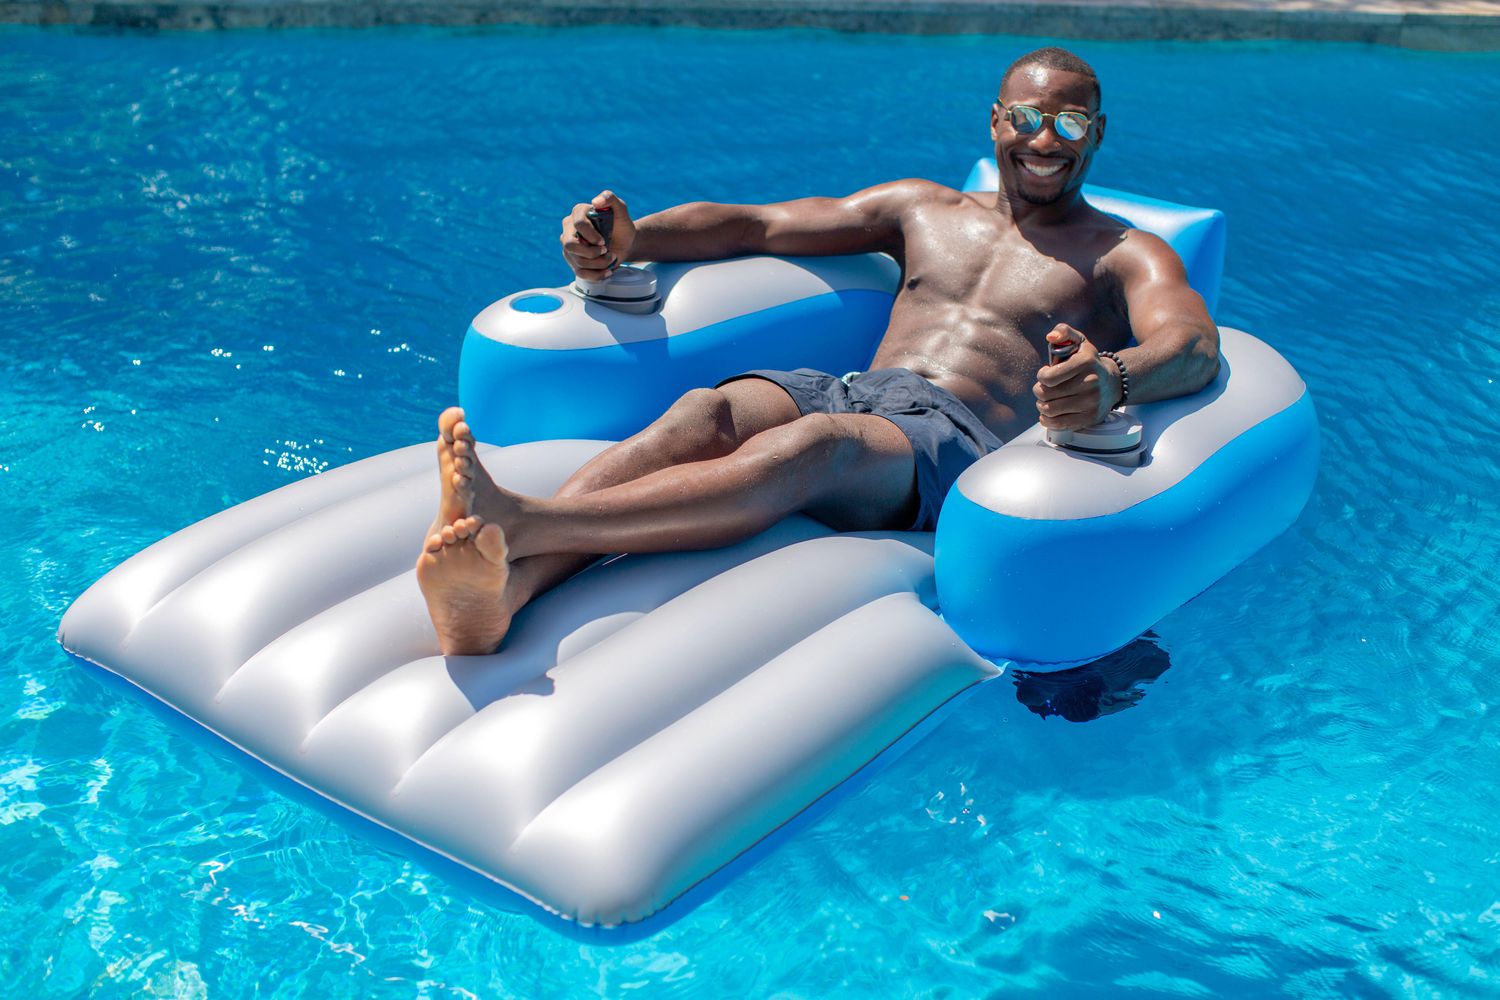 Pool Floats and Loungers in Floats and Pool Games